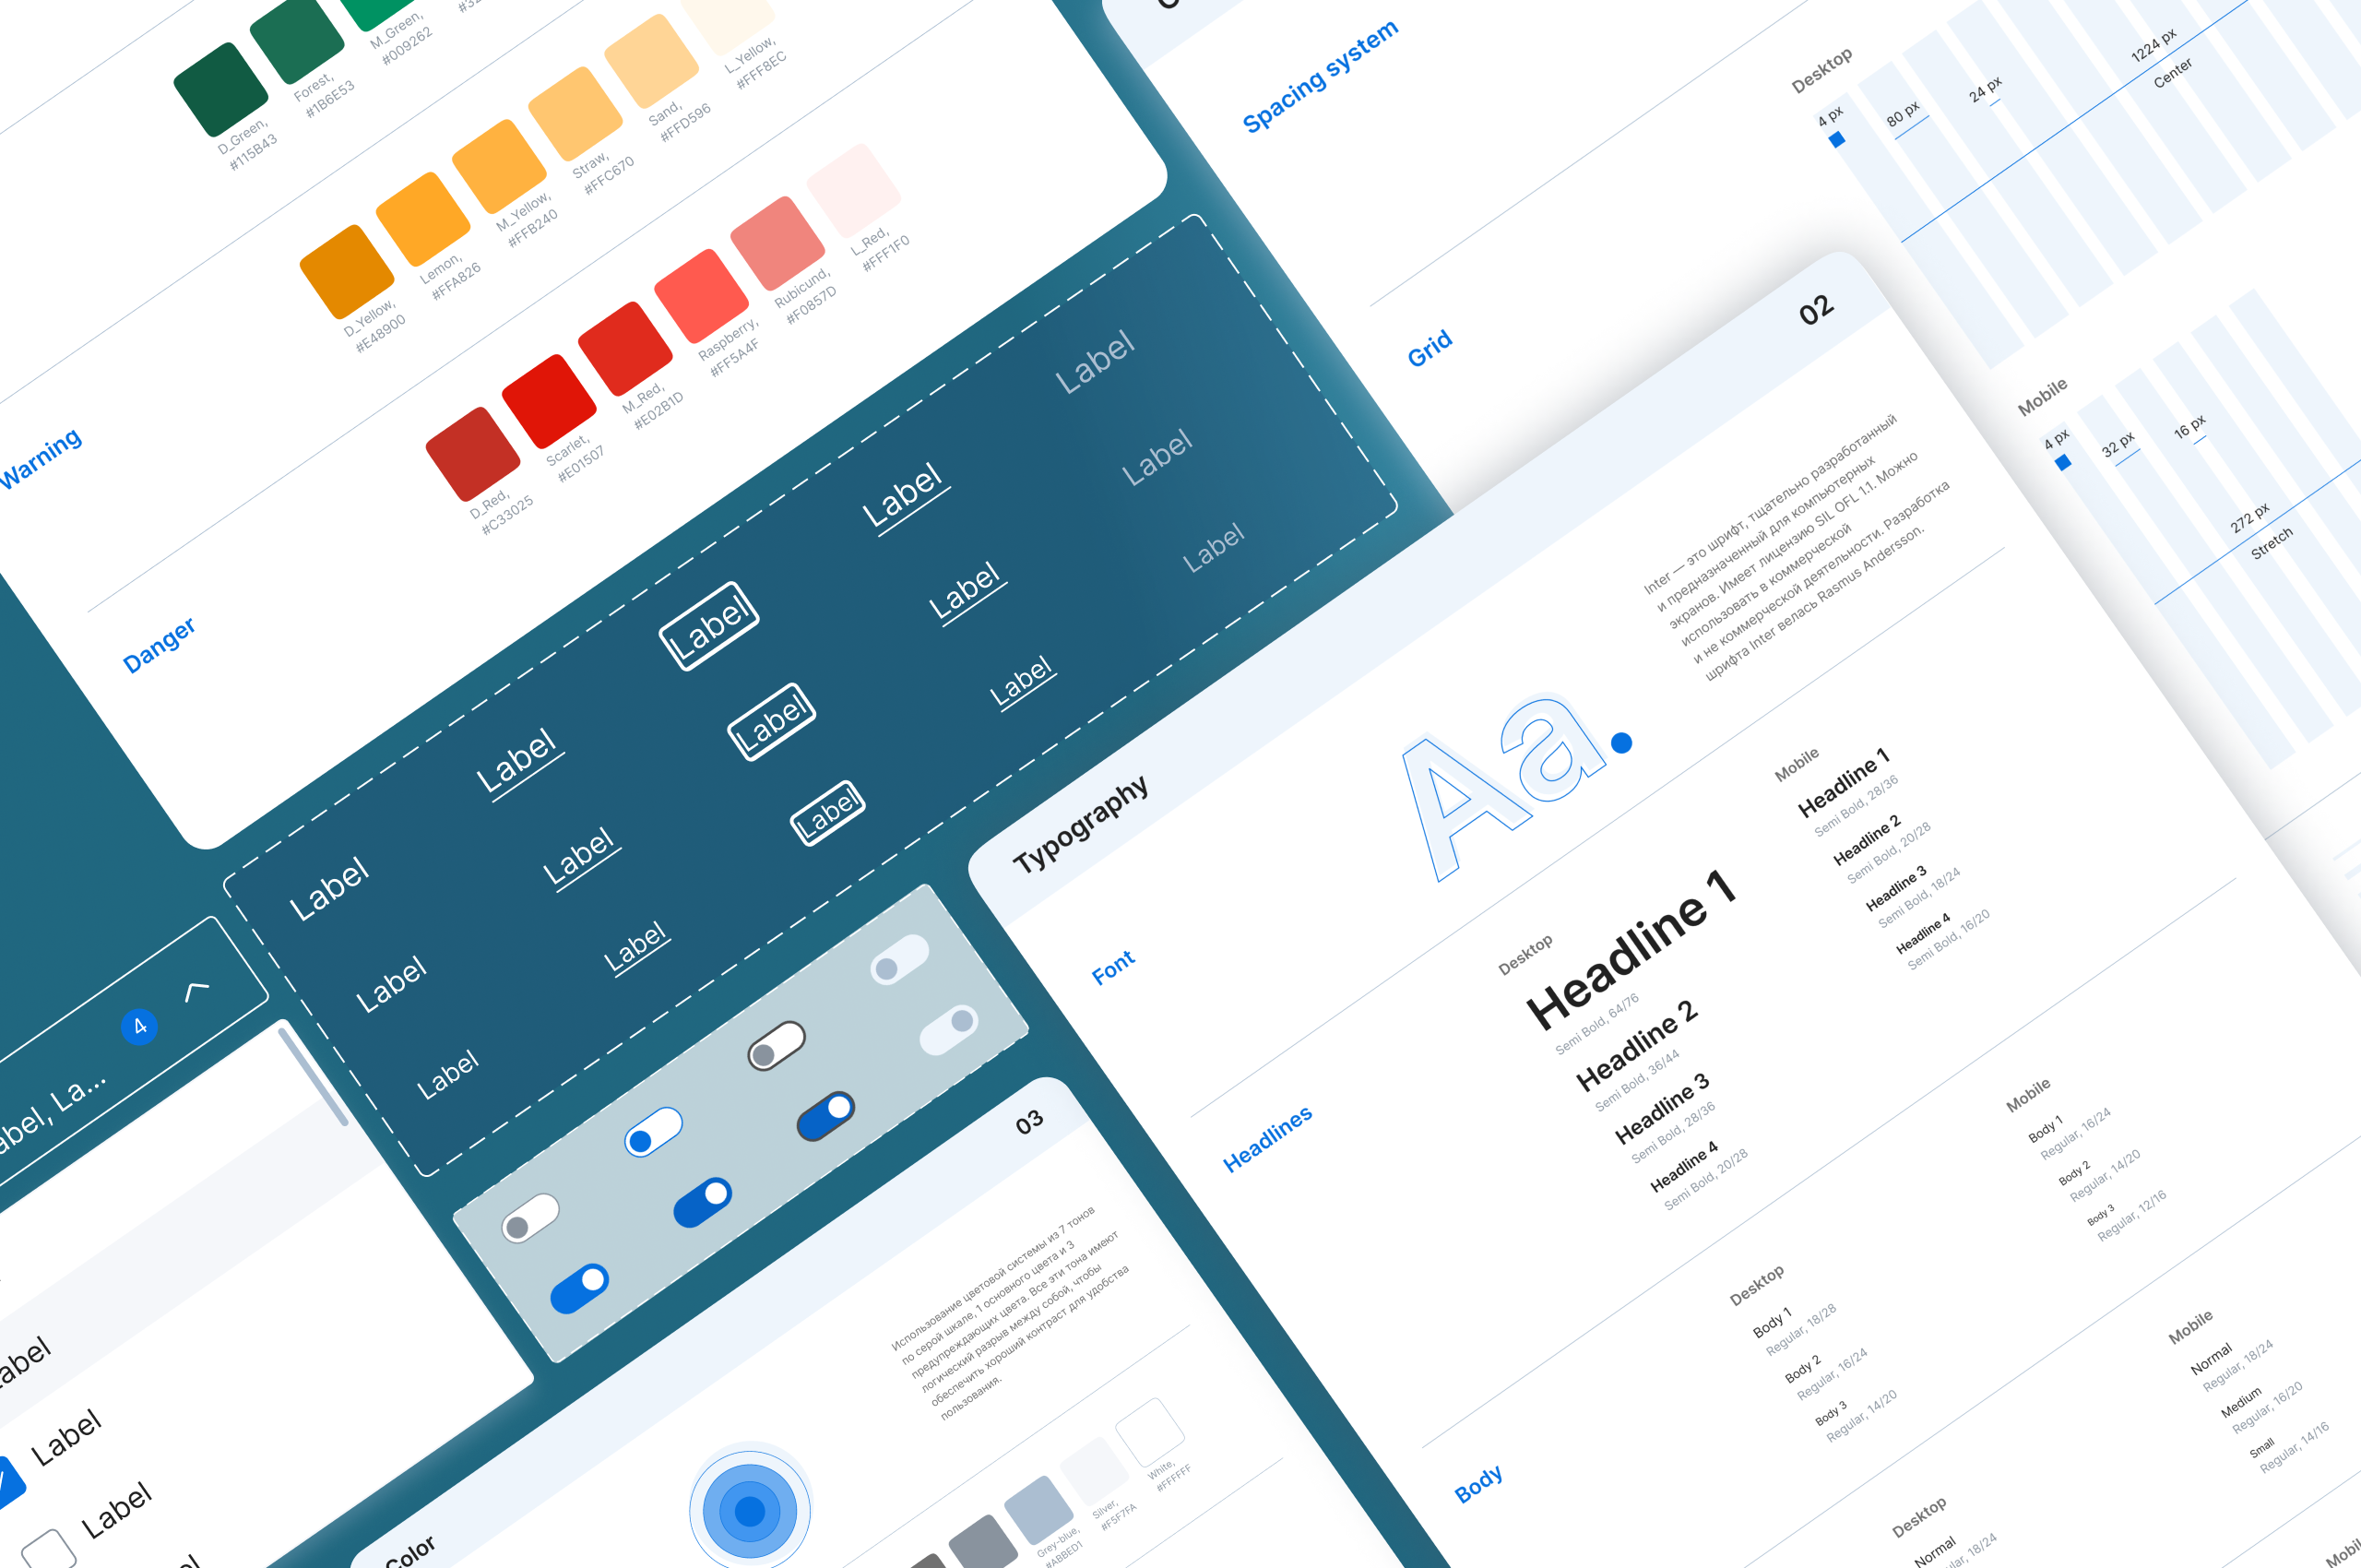 Utilising design systems within your website UX